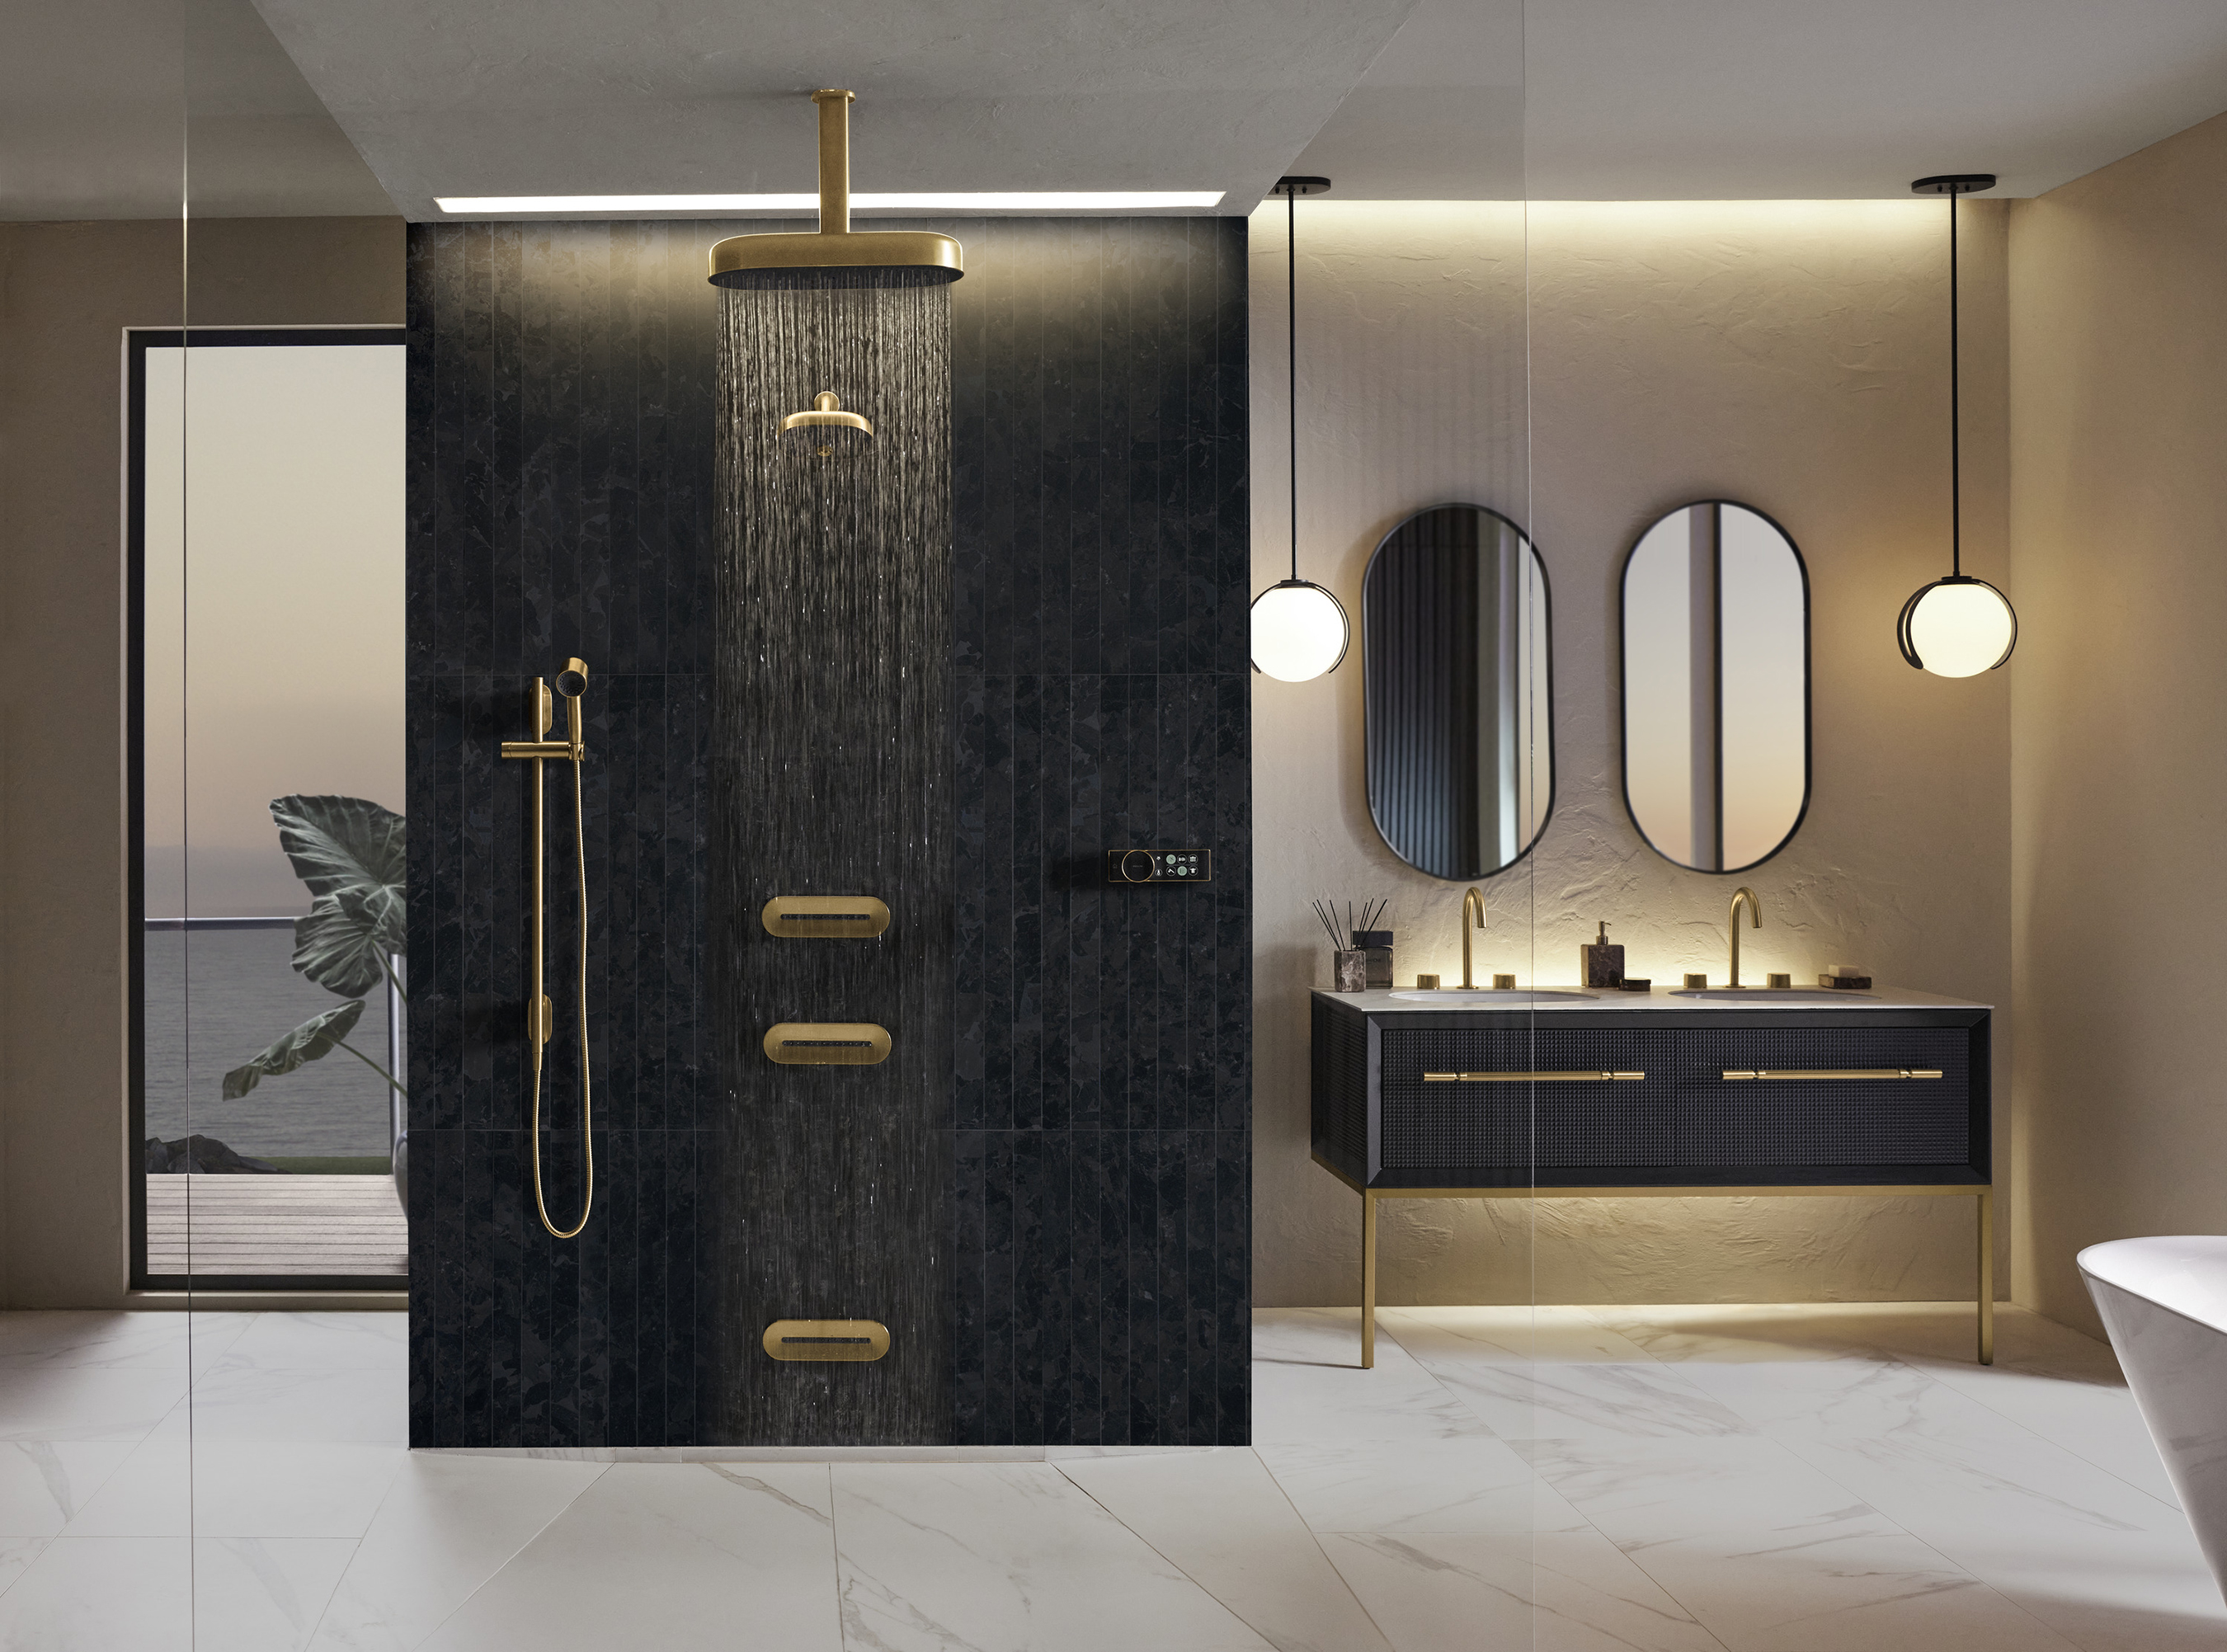 Anthem Digital and the Statement Showering Collection